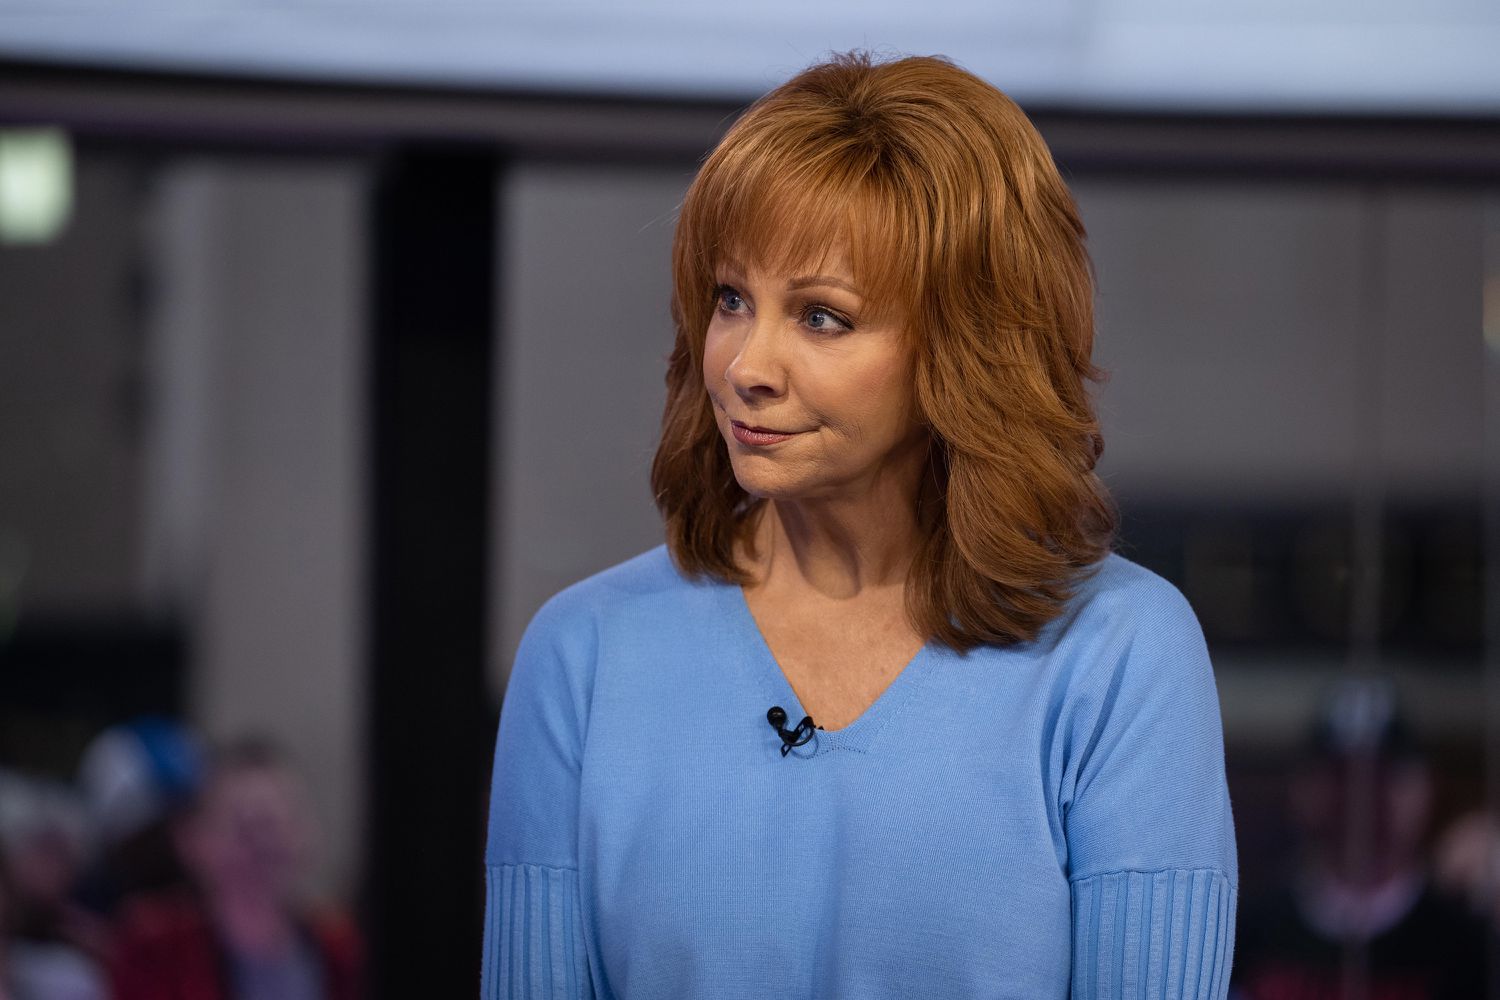 Reba Mcentire Movies And Tv Shows Networth